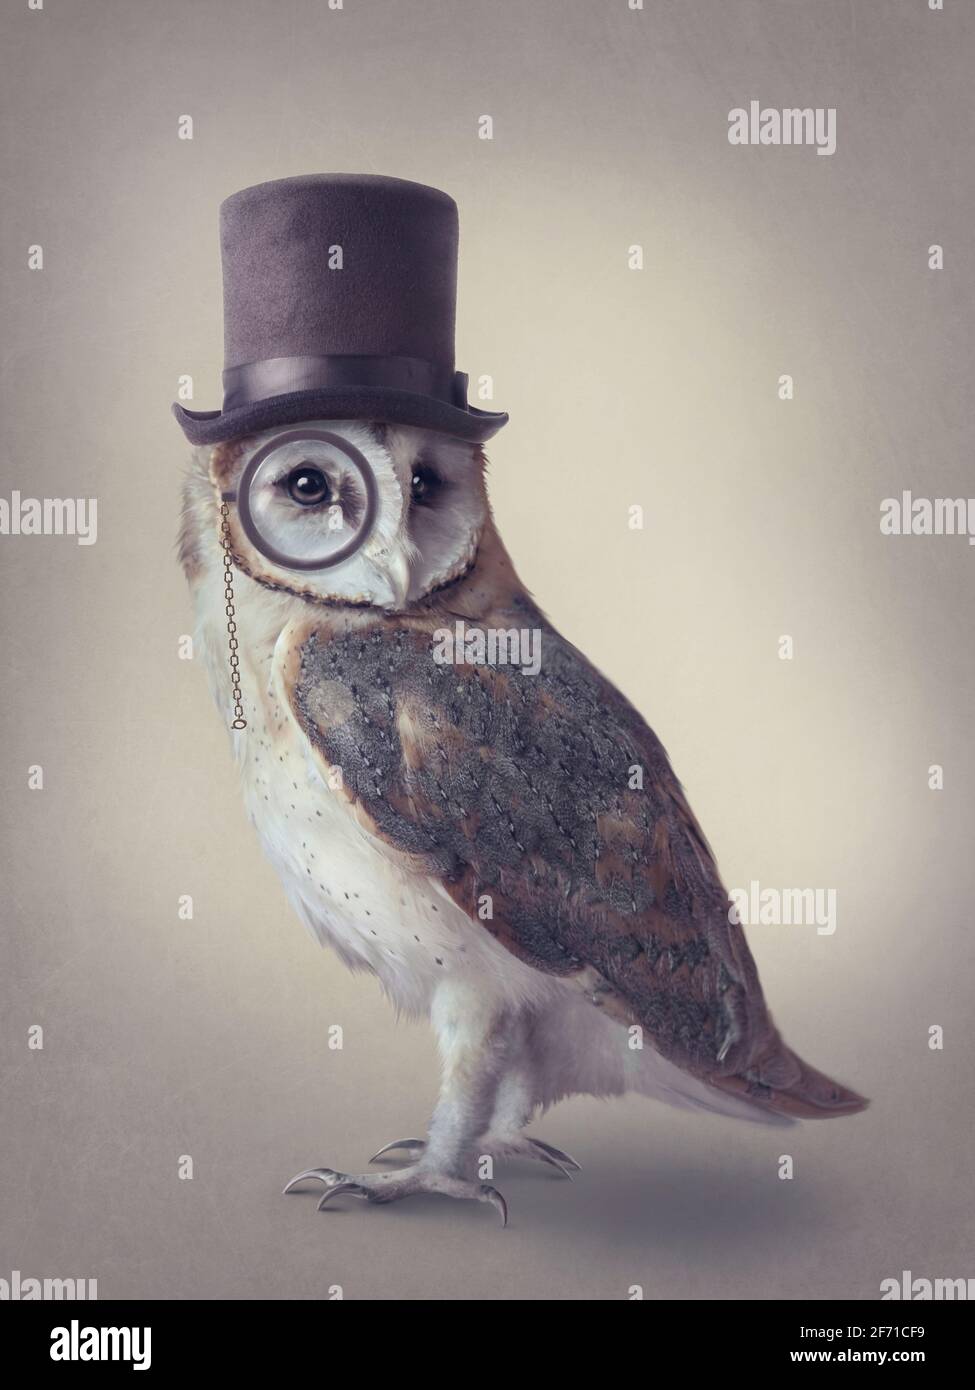 Wise owl with hat and monocle Stock Photo